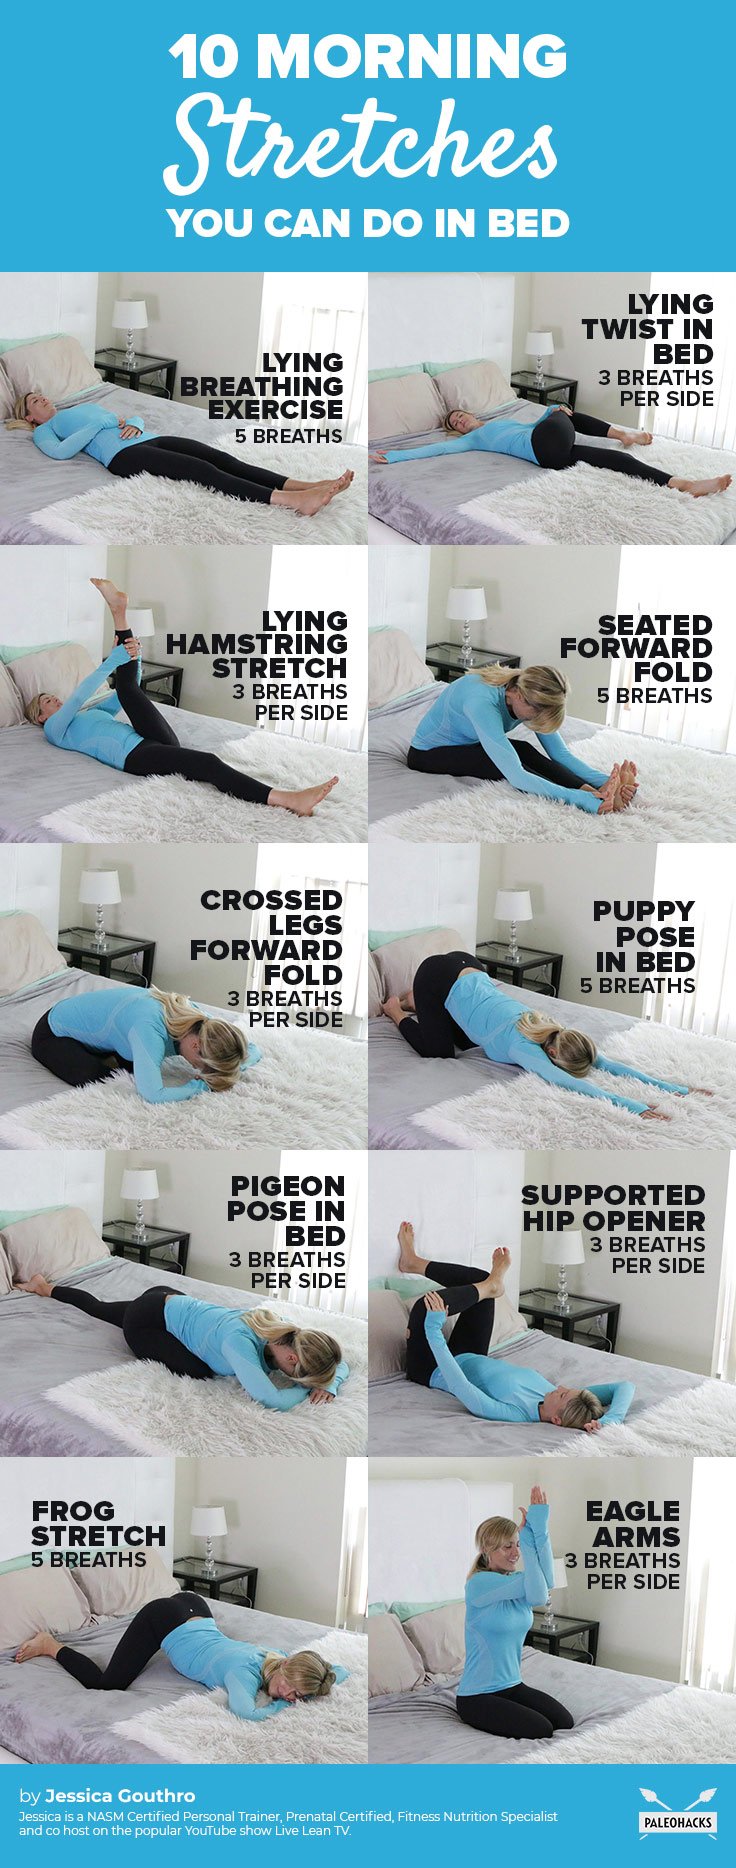 These 10 relaxing stretches are perfect for mornings when you struggle to get out of bed. They strike the perfect balance between relaxing and energizing.